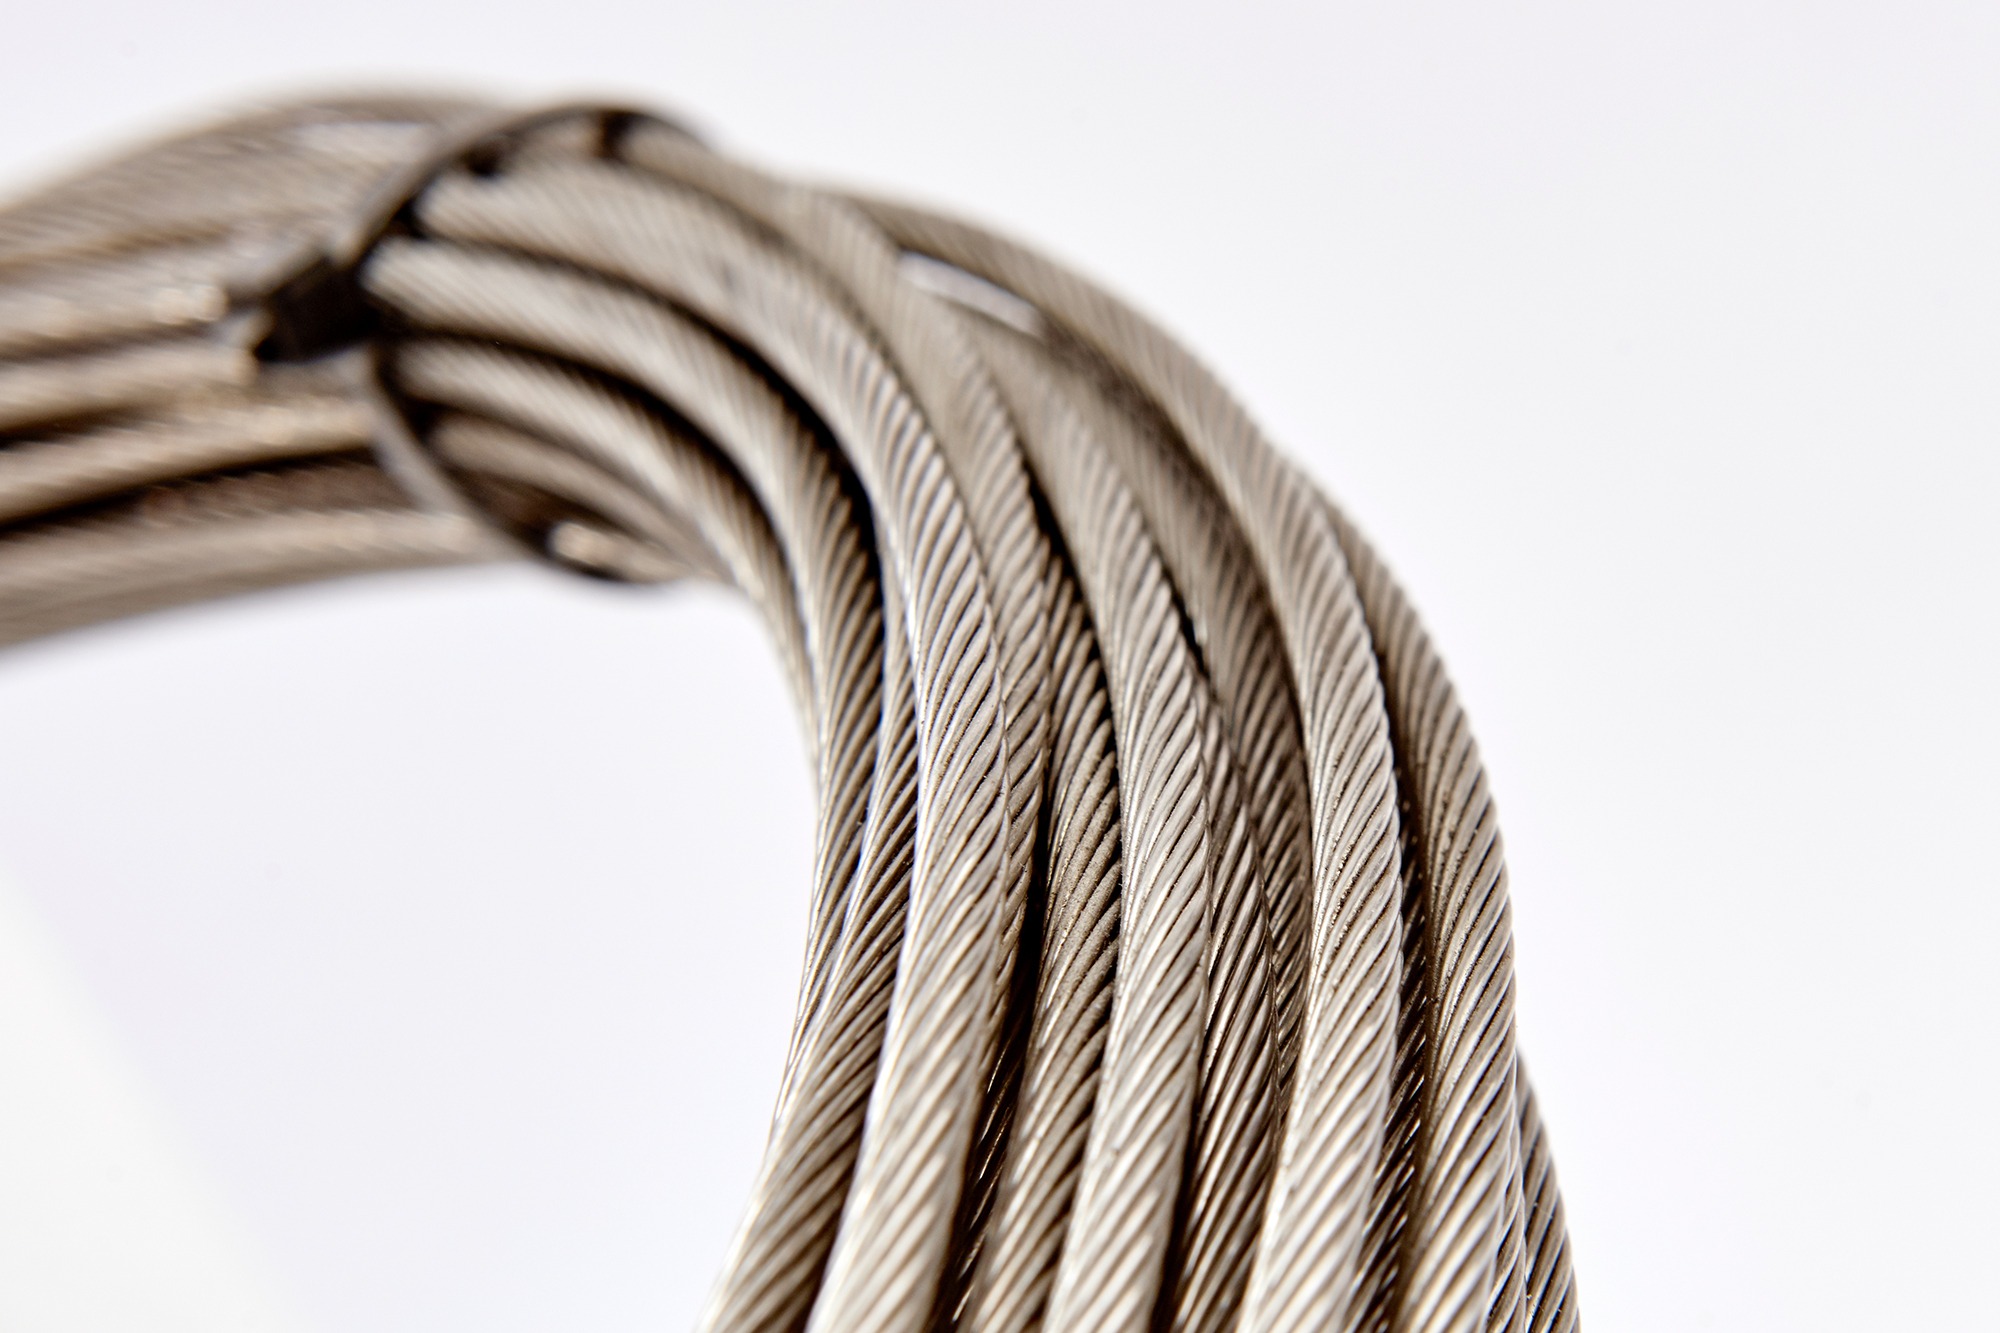 Monel® K-500 is available in bars and wire rope